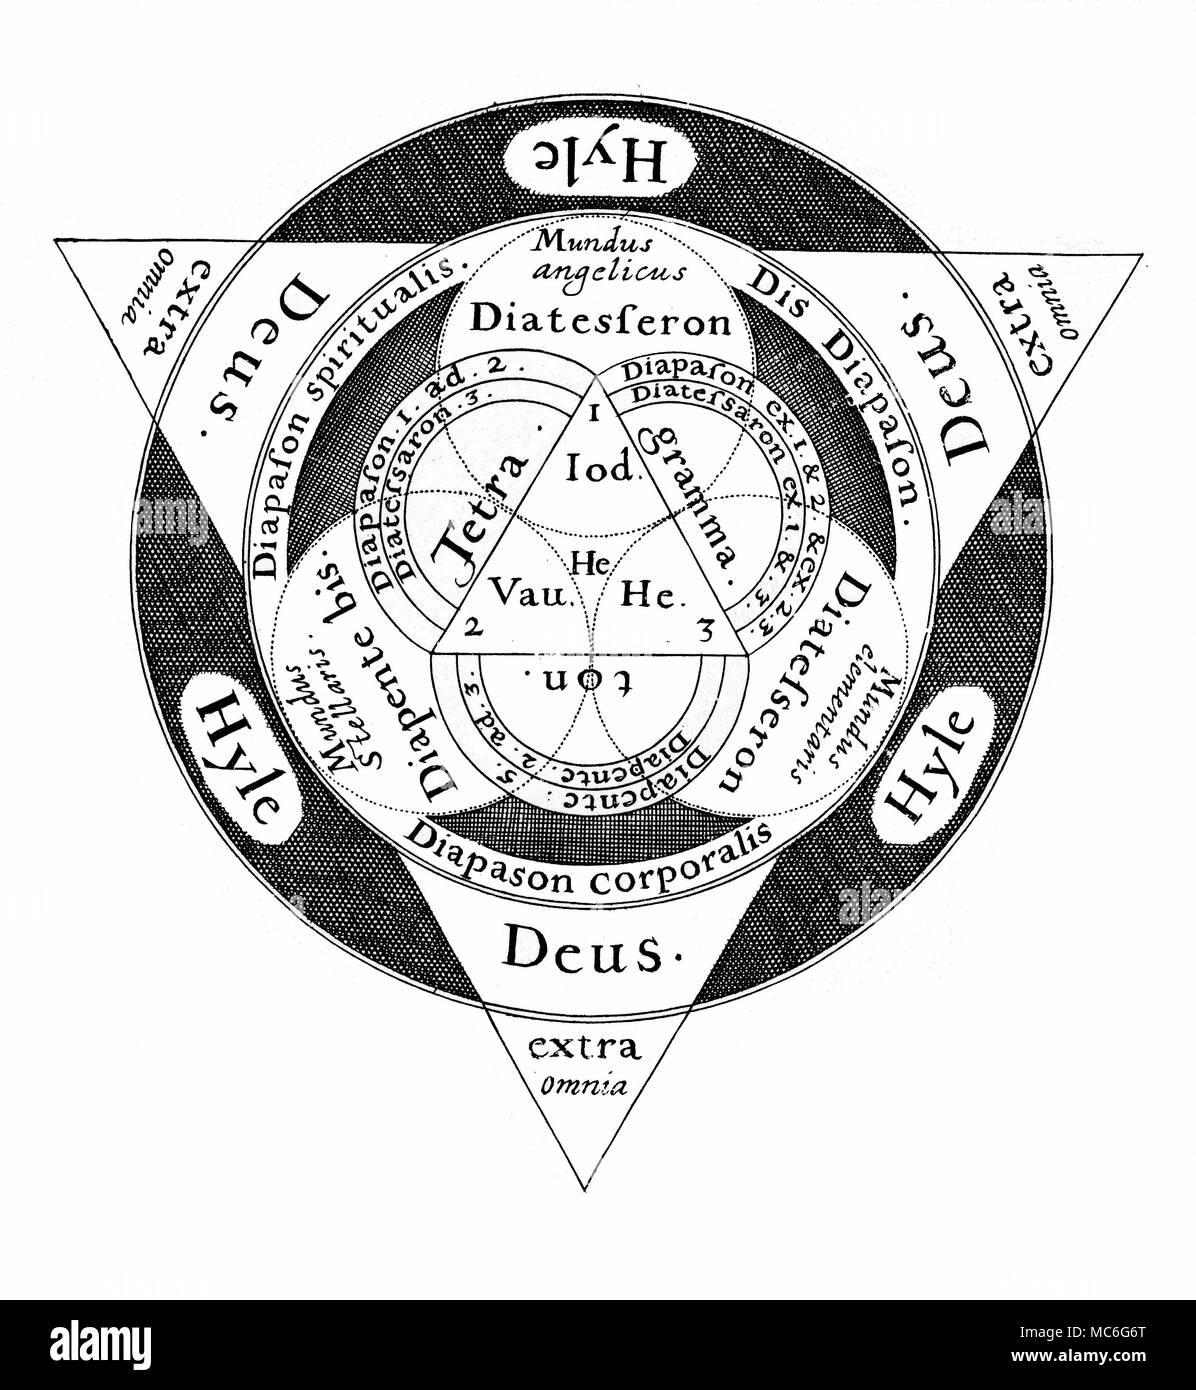 SYMBOLS - THE SACRED TRIAD An engraving of a design devised by the occultist Robert Fludd, to illustrate the properties and musical harmonies of the Trinity. The Triangle of the Godhead, which is a Three in One, is expressed in light emerging into the darkness of Matter (Hyle). The consequence of this merging of light and darkness is the creation of three worlds (the circles that touch the three lines of the larger triangle: these are the Angelic World, the Stellar World, and the Elementary World. The innermost triangle is united to the outermost by musical intervals (the Diapente and the Stock Photo